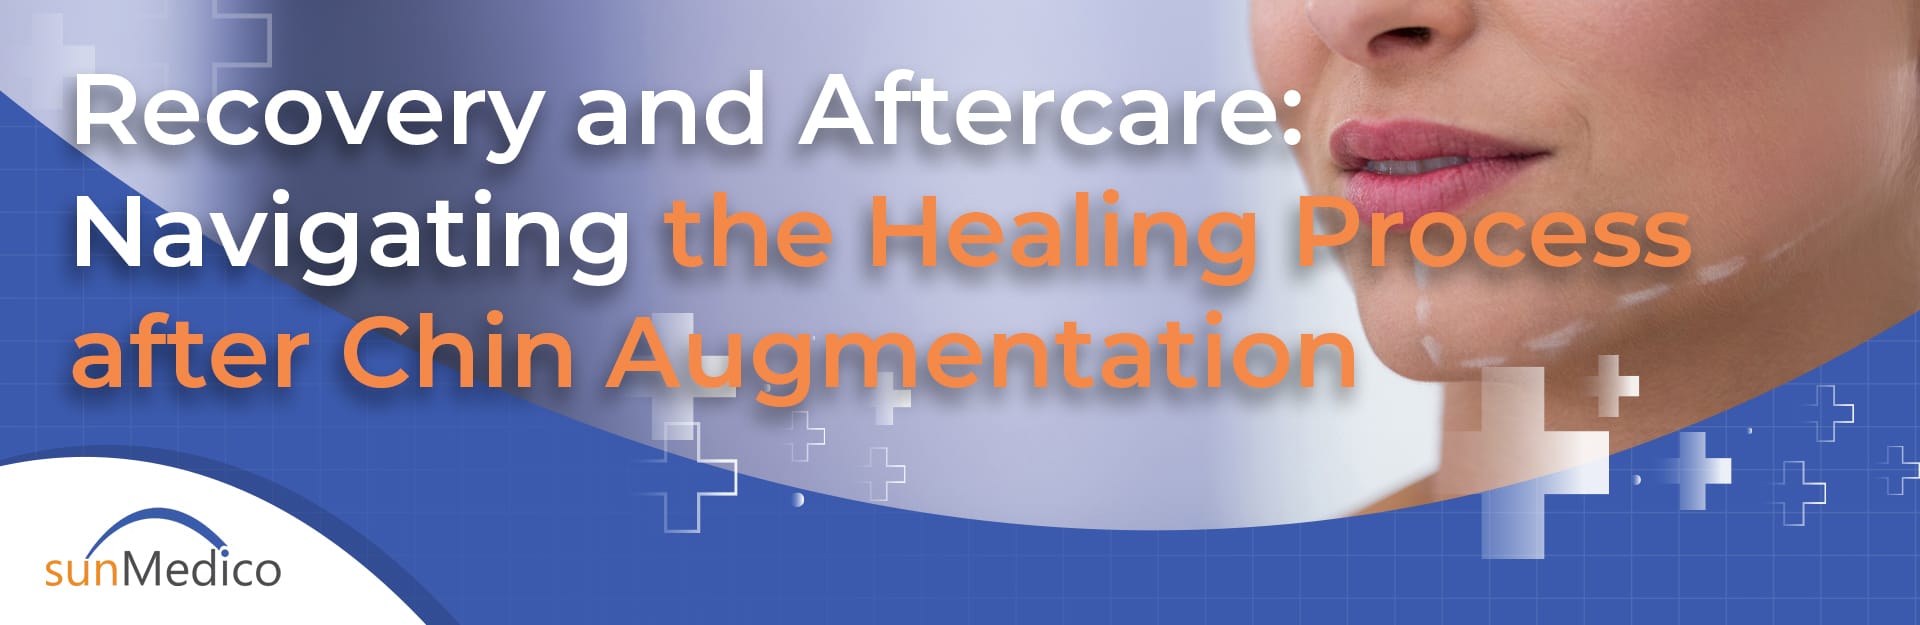 Recovery and Aftercare: Navigating the Healing Process after Chin Augmentation